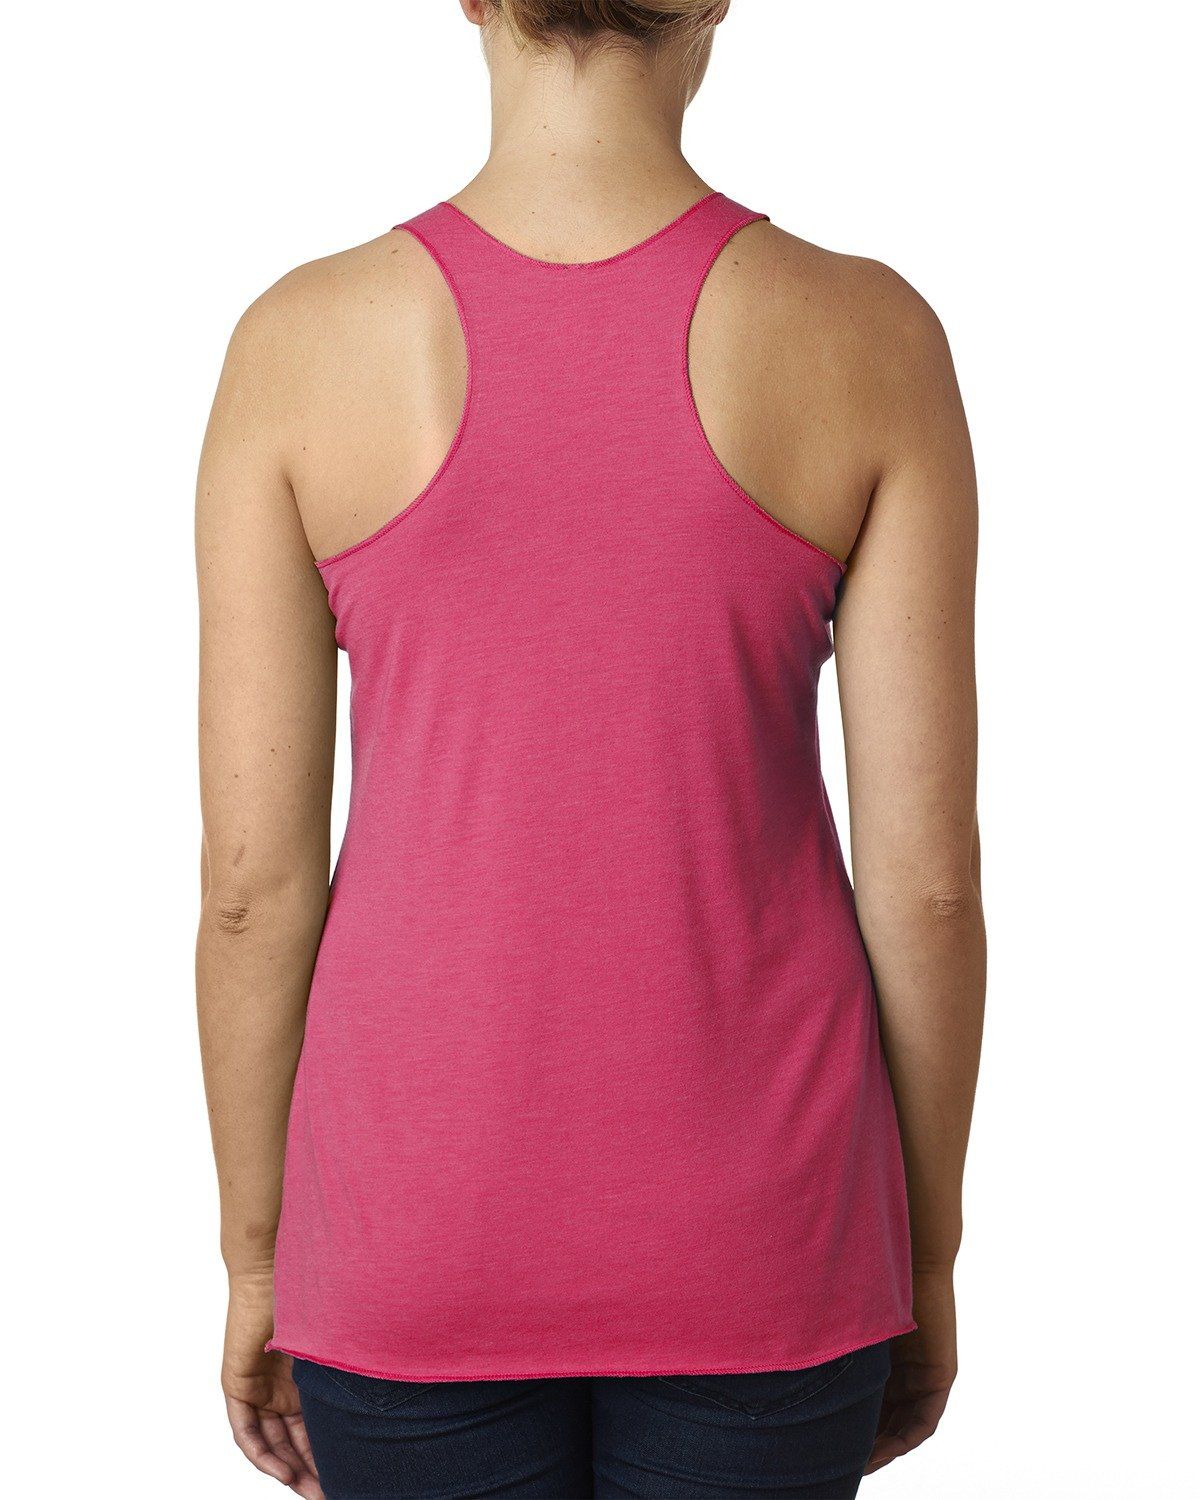 Always Let Them See You Sweat - Women's Triblend Racerback Tank